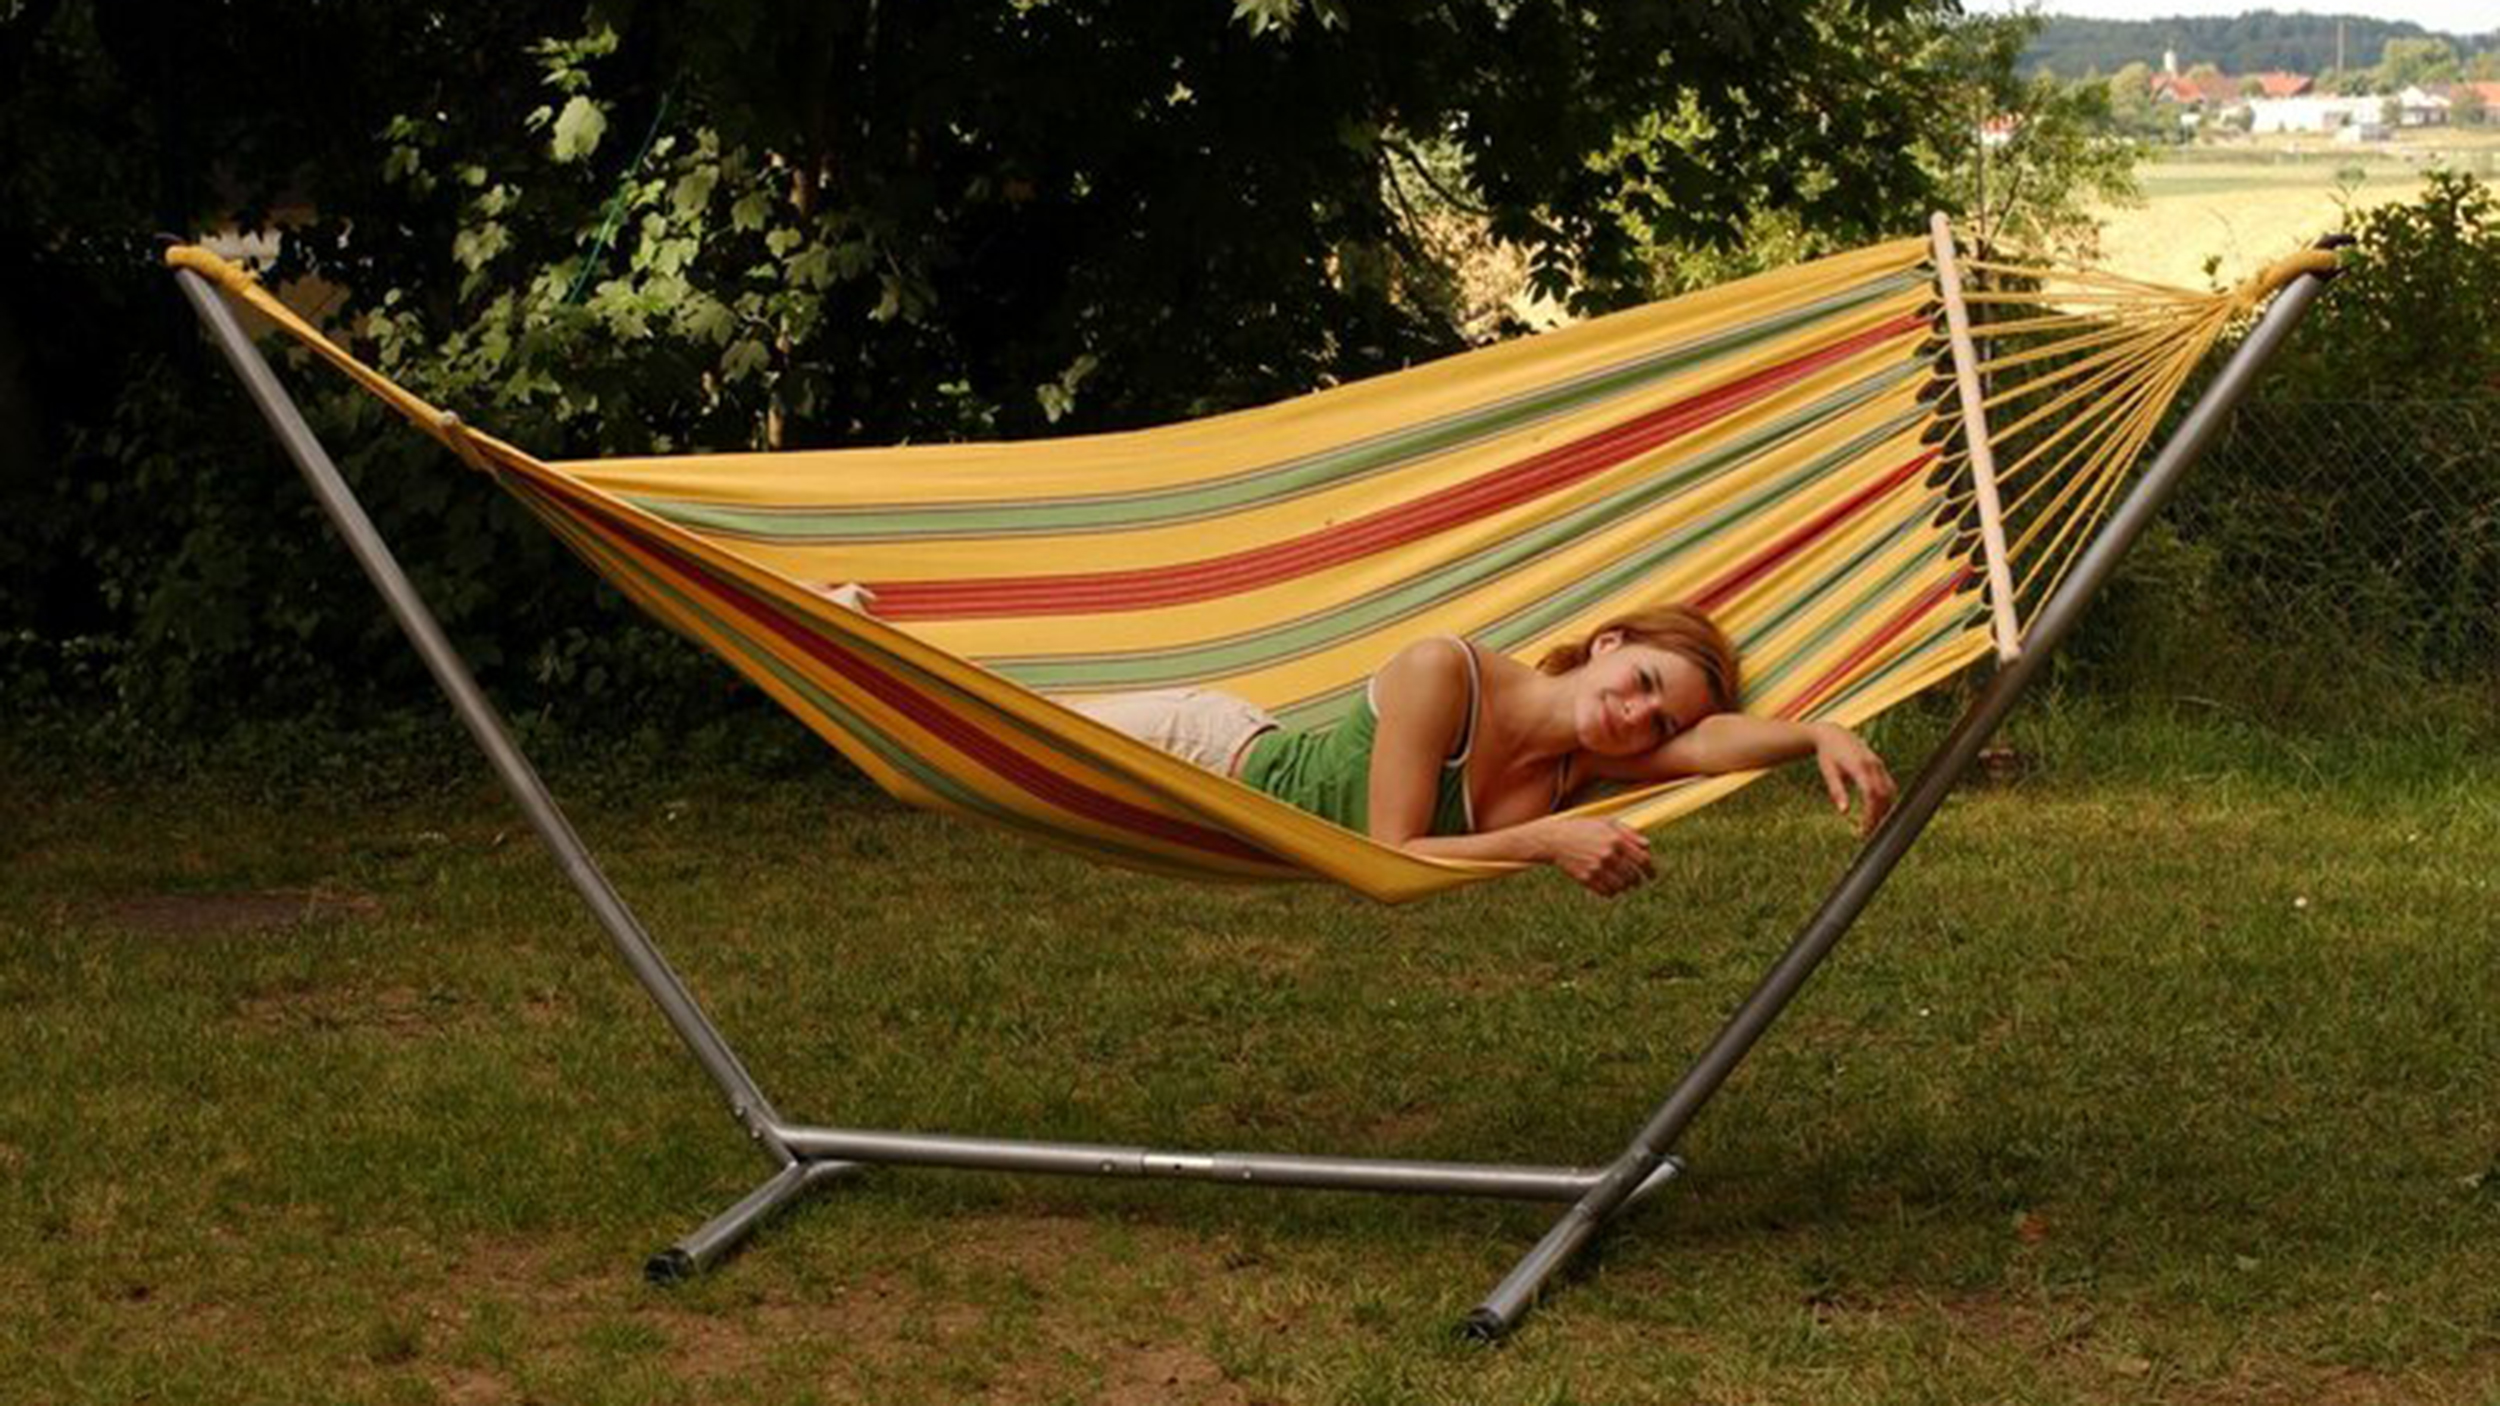 WJKL&MCN Portable Outdoor Double Hammock with Space Saving Comfort Durability Yard Striped Hanging Chair Large Hammock Chair